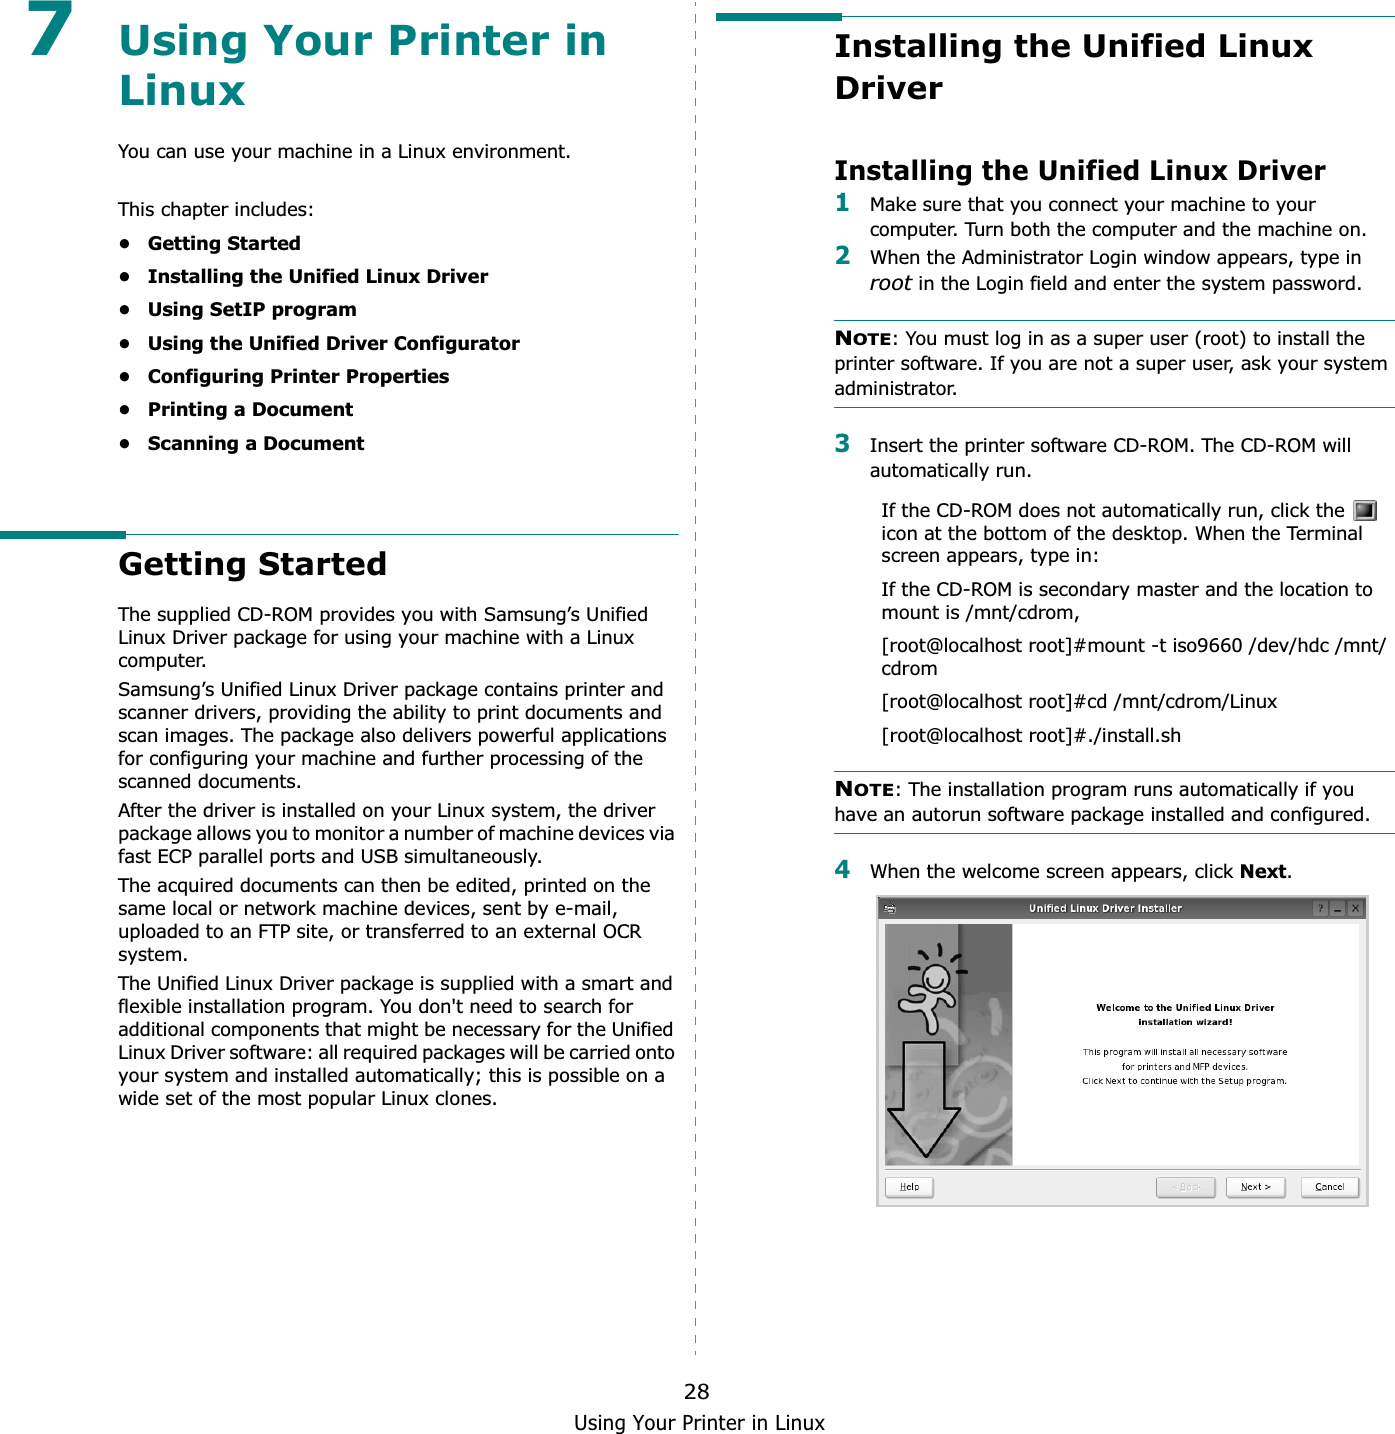 Using Your Printer in Linux287Using Your Printer in LinuxYou can use your machine in a Linux environment. This chapter includes:• Getting Started• Installing the Unified Linux Driver• Using SetIP program• Using the Unified Driver Configurator• Configuring Printer Properties• Printing a Document• Scanning a DocumentGetting StartedThe supplied CD-ROM provides you with Samsung’s Unified Linux Driver package for using your machine with a Linux computer.Samsung’s Unified Linux Driver package contains printer and scanner drivers, providing the ability to print documents and scan images. The package also delivers powerful applications for configuring your machine and further processing of the scanned documents.After the driver is installed on your Linux system, the driver package allows you to monitor a number of machine devices via fast ECP parallel ports and USB simultaneously. The acquired documents can then be edited, printed on the same local or network machine devices, sent by e-mail, uploaded to an FTP site, or transferred to an external OCR system.The Unified Linux Driver package is supplied with a smart and flexible installation program. You don&apos;t need to search for additional components that might be necessary for the Unified Linux Driver software: all required packages will be carried onto your system and installed automatically; this is possible on a wide set of the most popular Linux clones.Installing the Unified Linux DriverInstalling the Unified Linux Driver1Make sure that you connect your machine to your computer. Turn both the computer and the machine on.2When the Administrator Login window appears, type in root in the Login field and enter the system password.NOTE: You must log in as a super user (root) to install the printer software. If you are not a super user, ask your system administrator.3Insert the printer software CD-ROM. The CD-ROM will automatically run.If the CD-ROM does not automatically run, click the   icon at the bottom of the desktop. When the Terminal screen appears, type in:If the CD-ROM is secondary master and the location to mount is /mnt/cdrom,[root@localhost root]#mount -t iso9660 /dev/hdc /mnt/cdrom[root@localhost root]#cd /mnt/cdrom/Linux[root@localhost root]#./install.sh NOTE: The installation program runs automatically if you have an autorun software package installed and configured.4When the welcome screen appears, click Next.